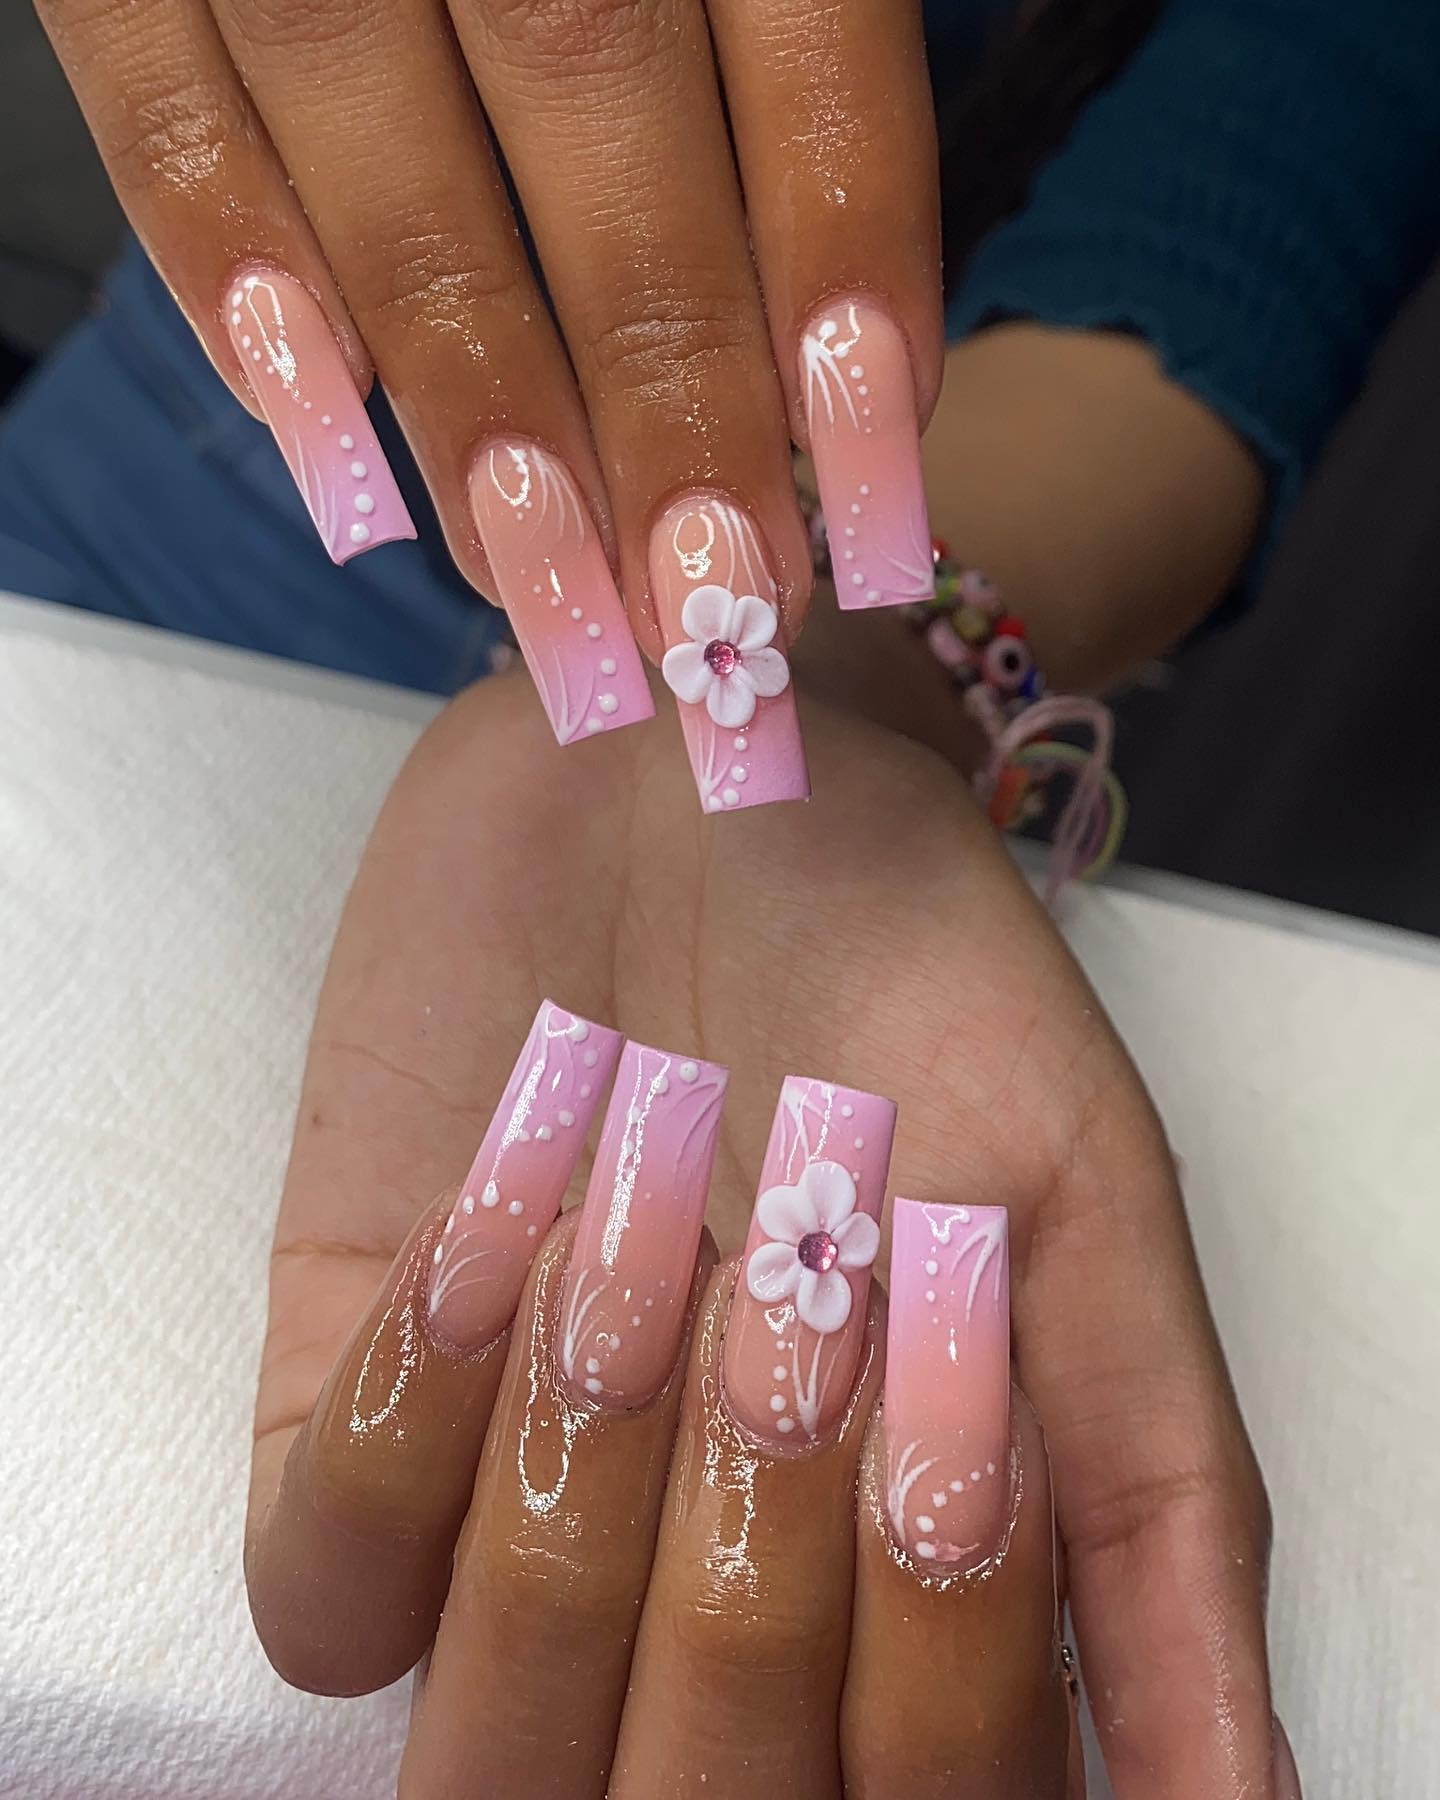 If you have an important event and you want to attract a ton of attention just know that you can do it with this loud pink nail art.